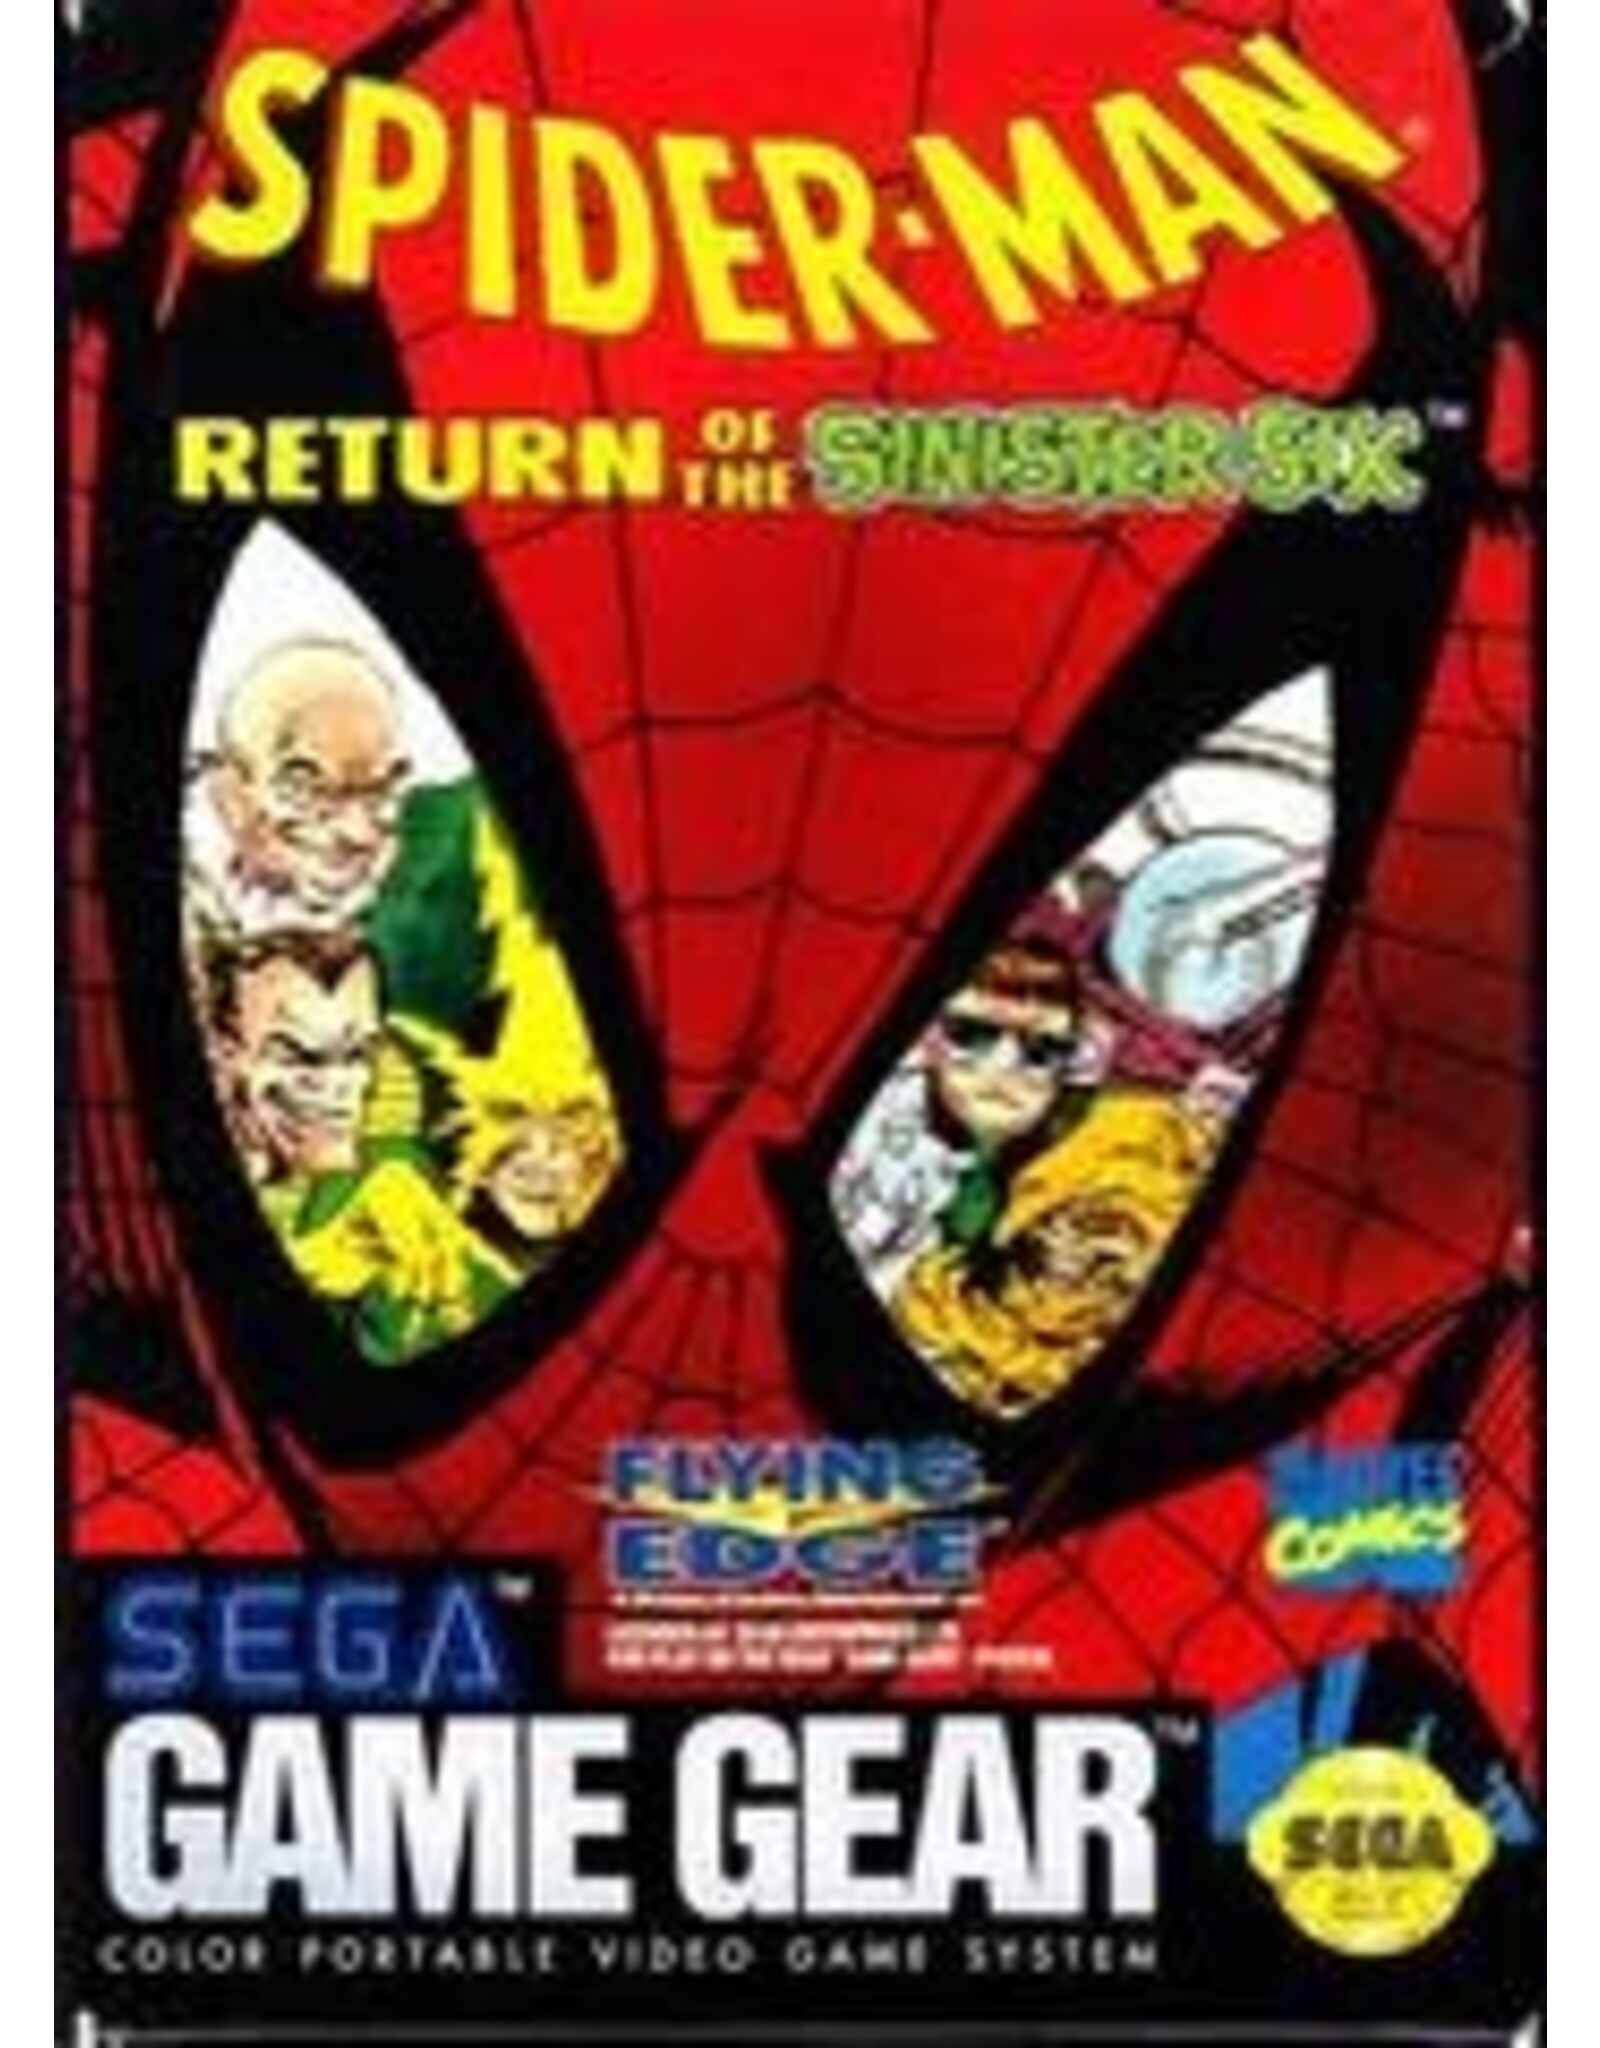 Sega Game Gear Spiderman Return of the Sinister Six (Cart Only)